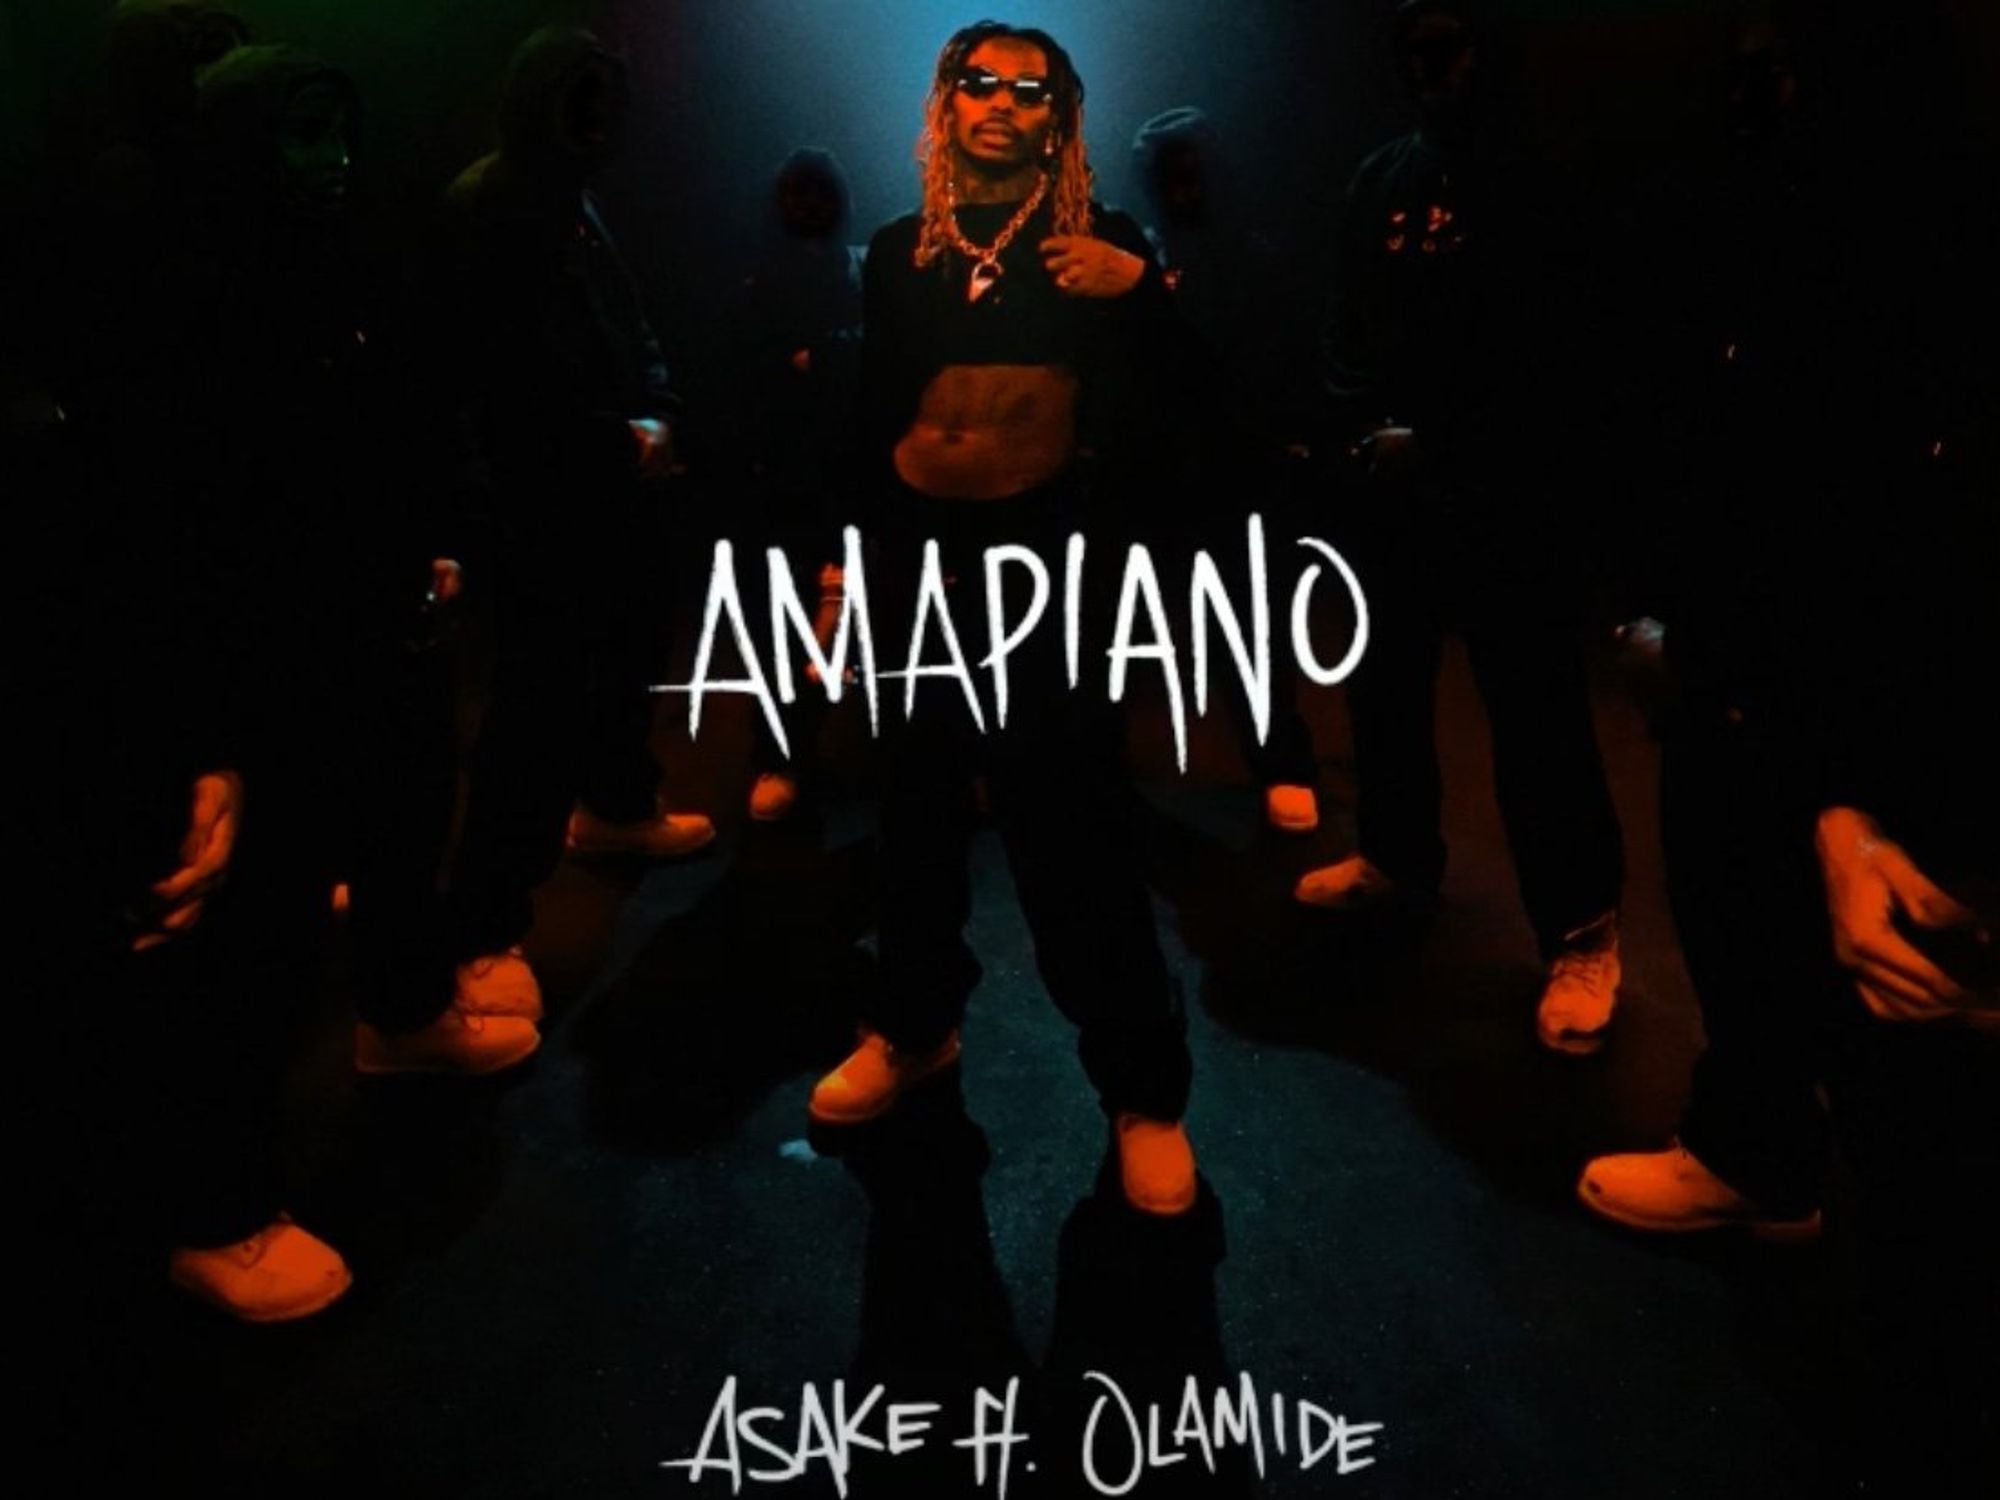 ​Screengrab from "Amapiano" by Asake and Olamide.